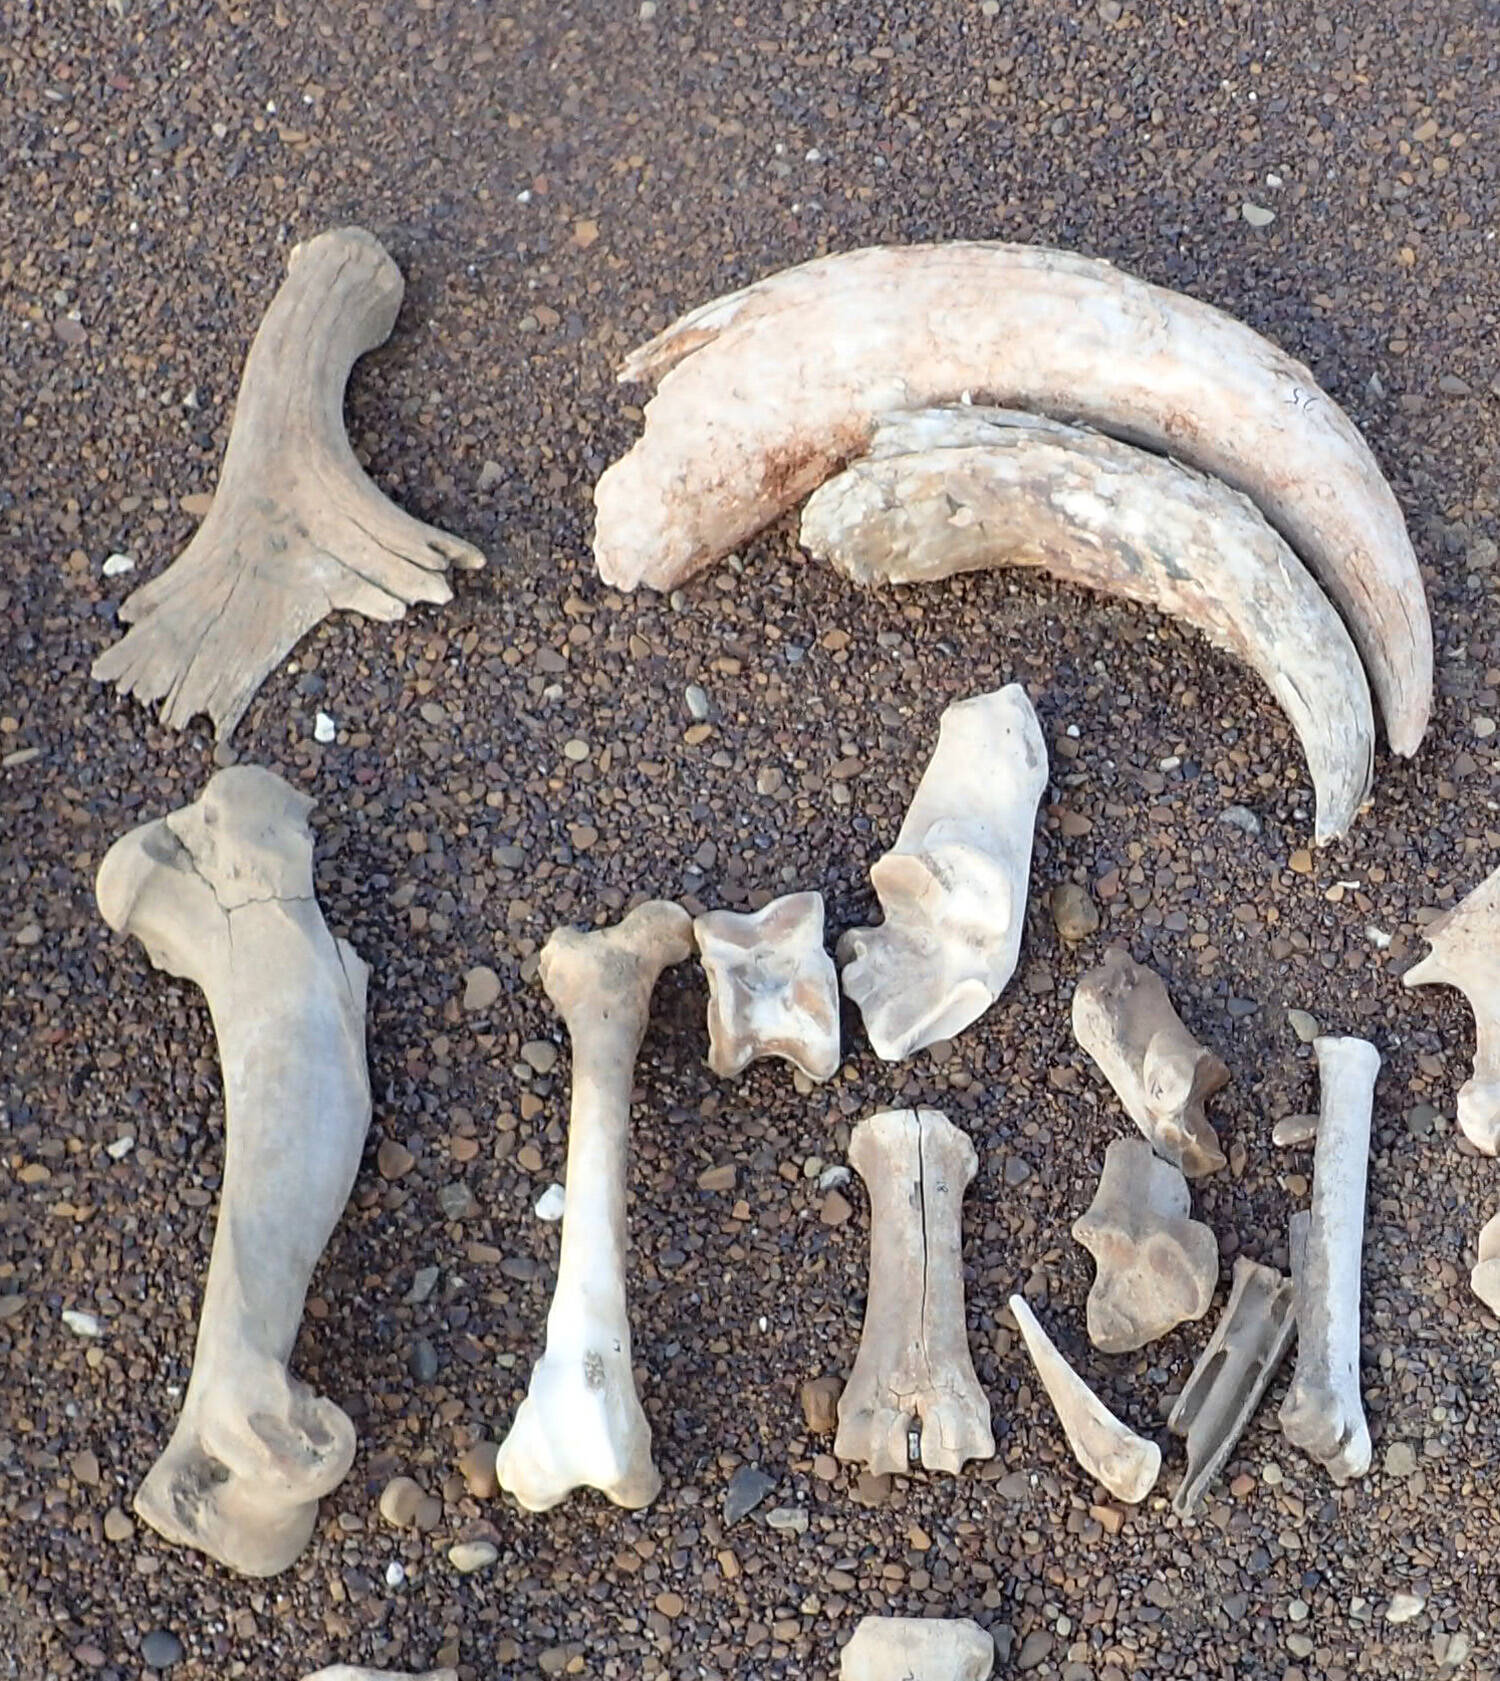 A 14,000-year-old fragment of a moose antler, top left, rests on a sand bar of a northern river next to the bones of ice-age horses, caribou and muskoxen, as well as the horns of a steppe bison. (Courtesy Photo / Pam Groves)